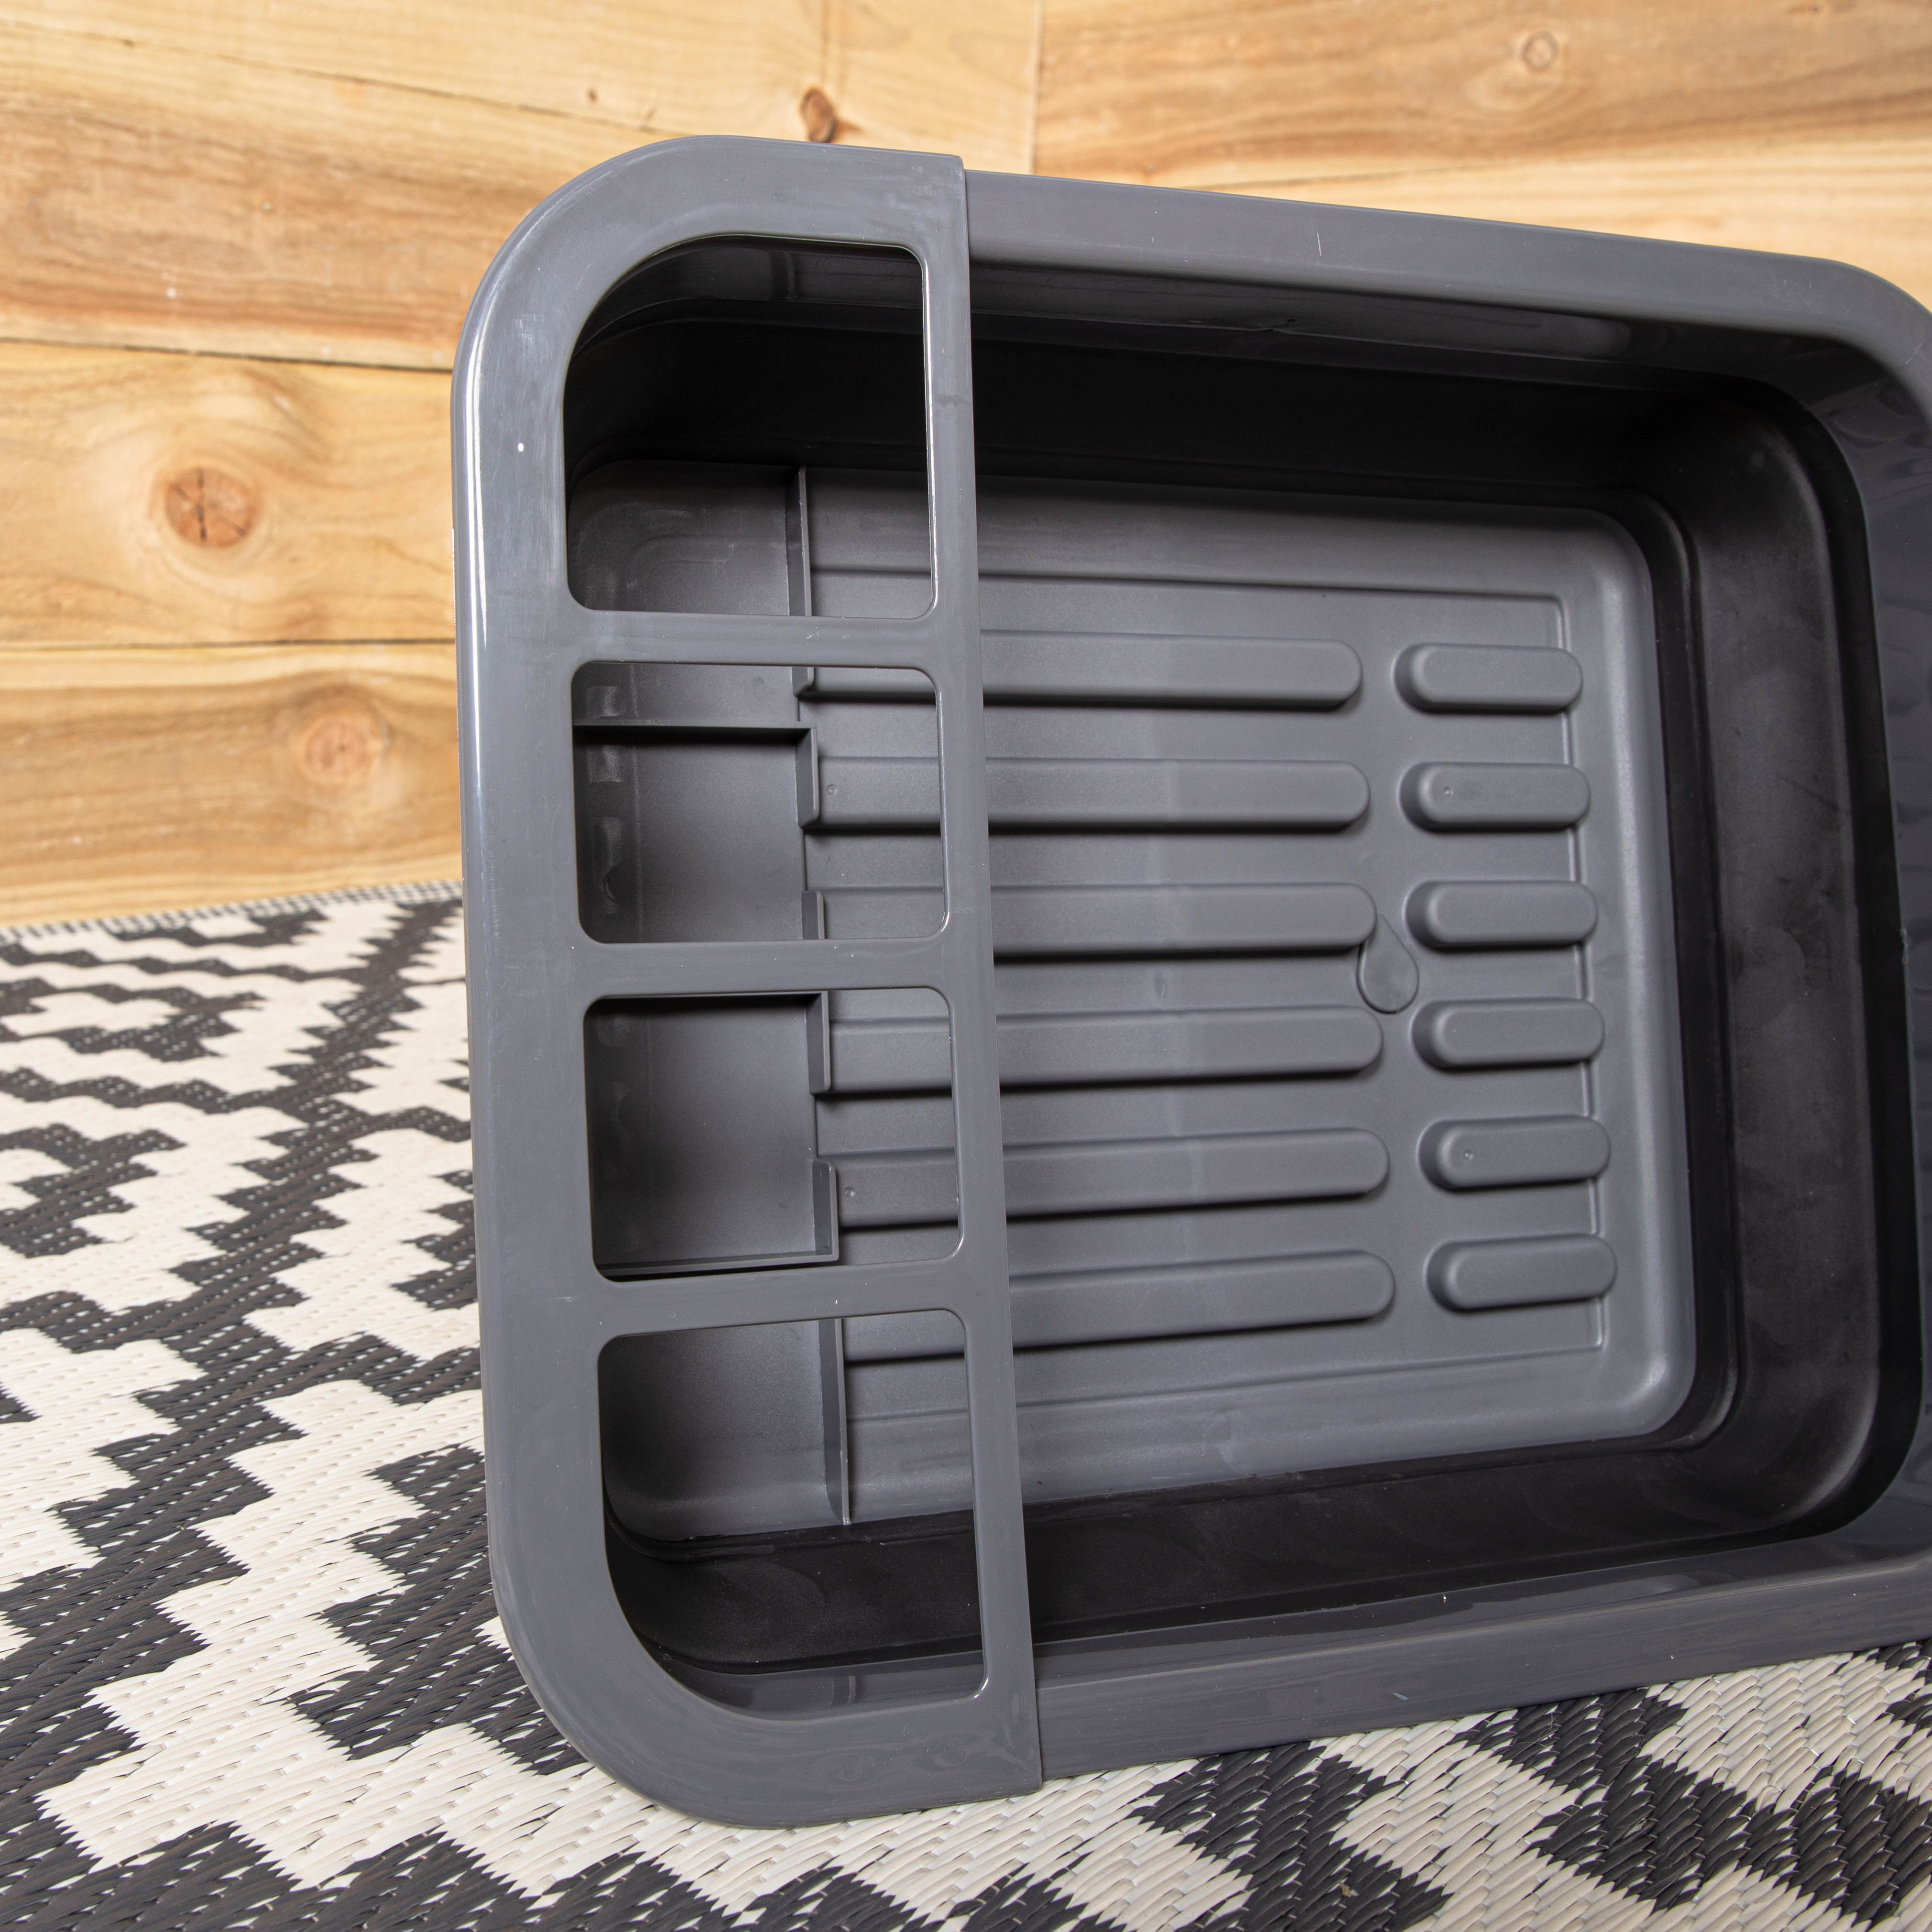 37cm Black and Grey Collapsible Folding Sink Dish Drainer with Draining System